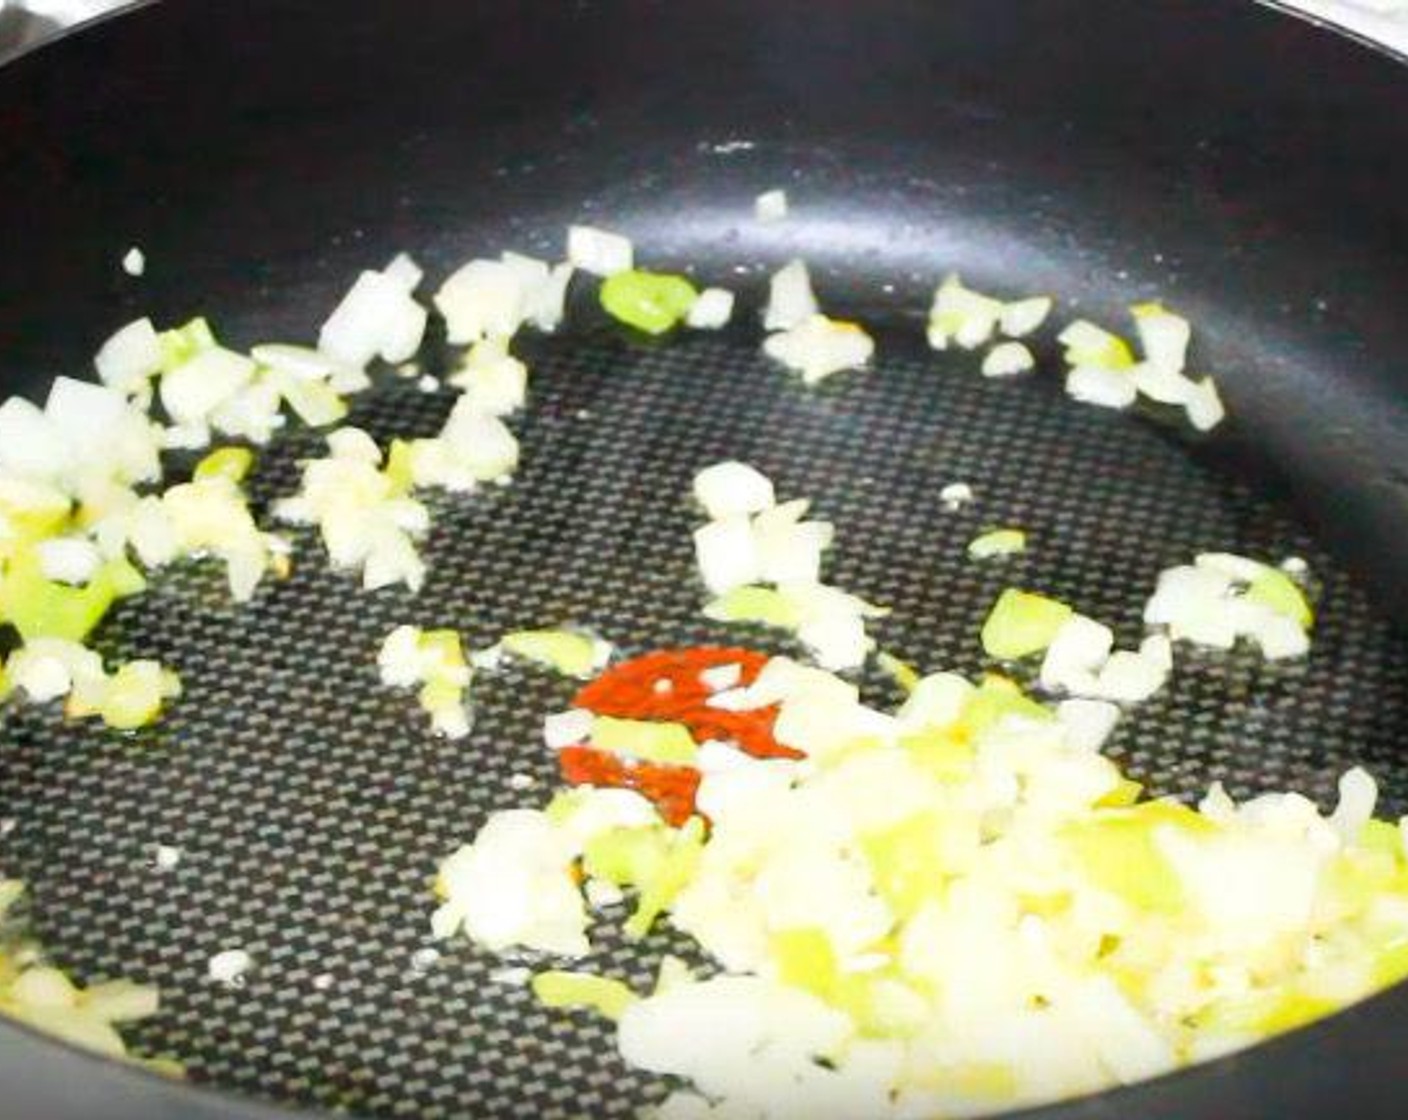 step 1 In a skillet over medium heat, add Olive Oil (2 Tbsp). Cook Onion (1) and Cubanelle Pepper (1/2) until translucent, about 2 minutes.